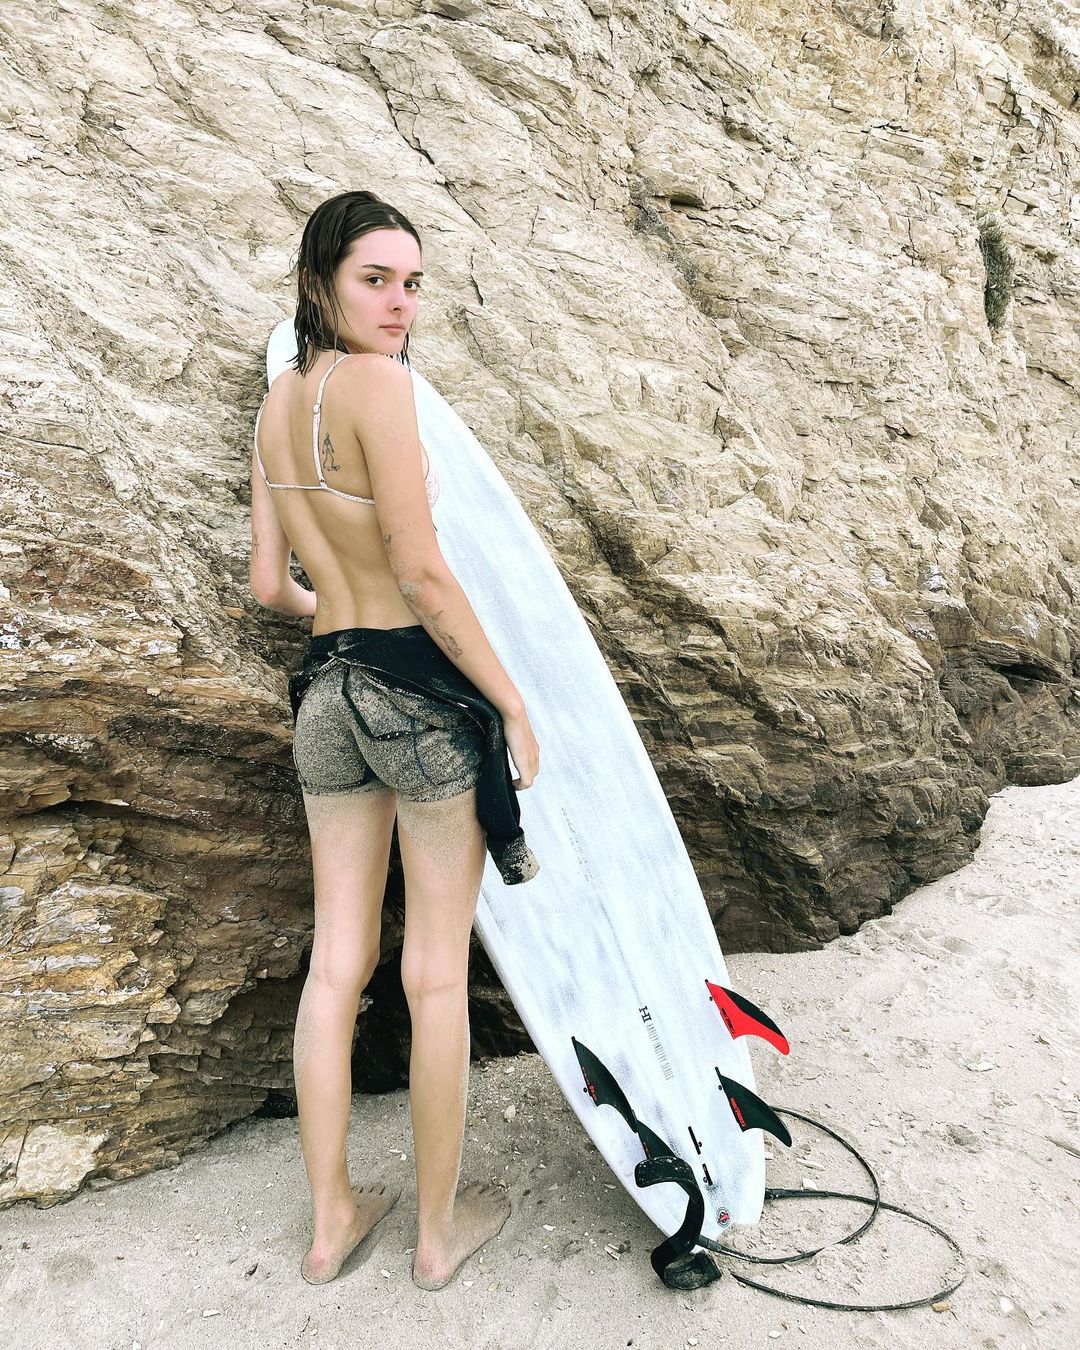 Charlotte Lawrence Wears the Viral Dress! - Photo 5